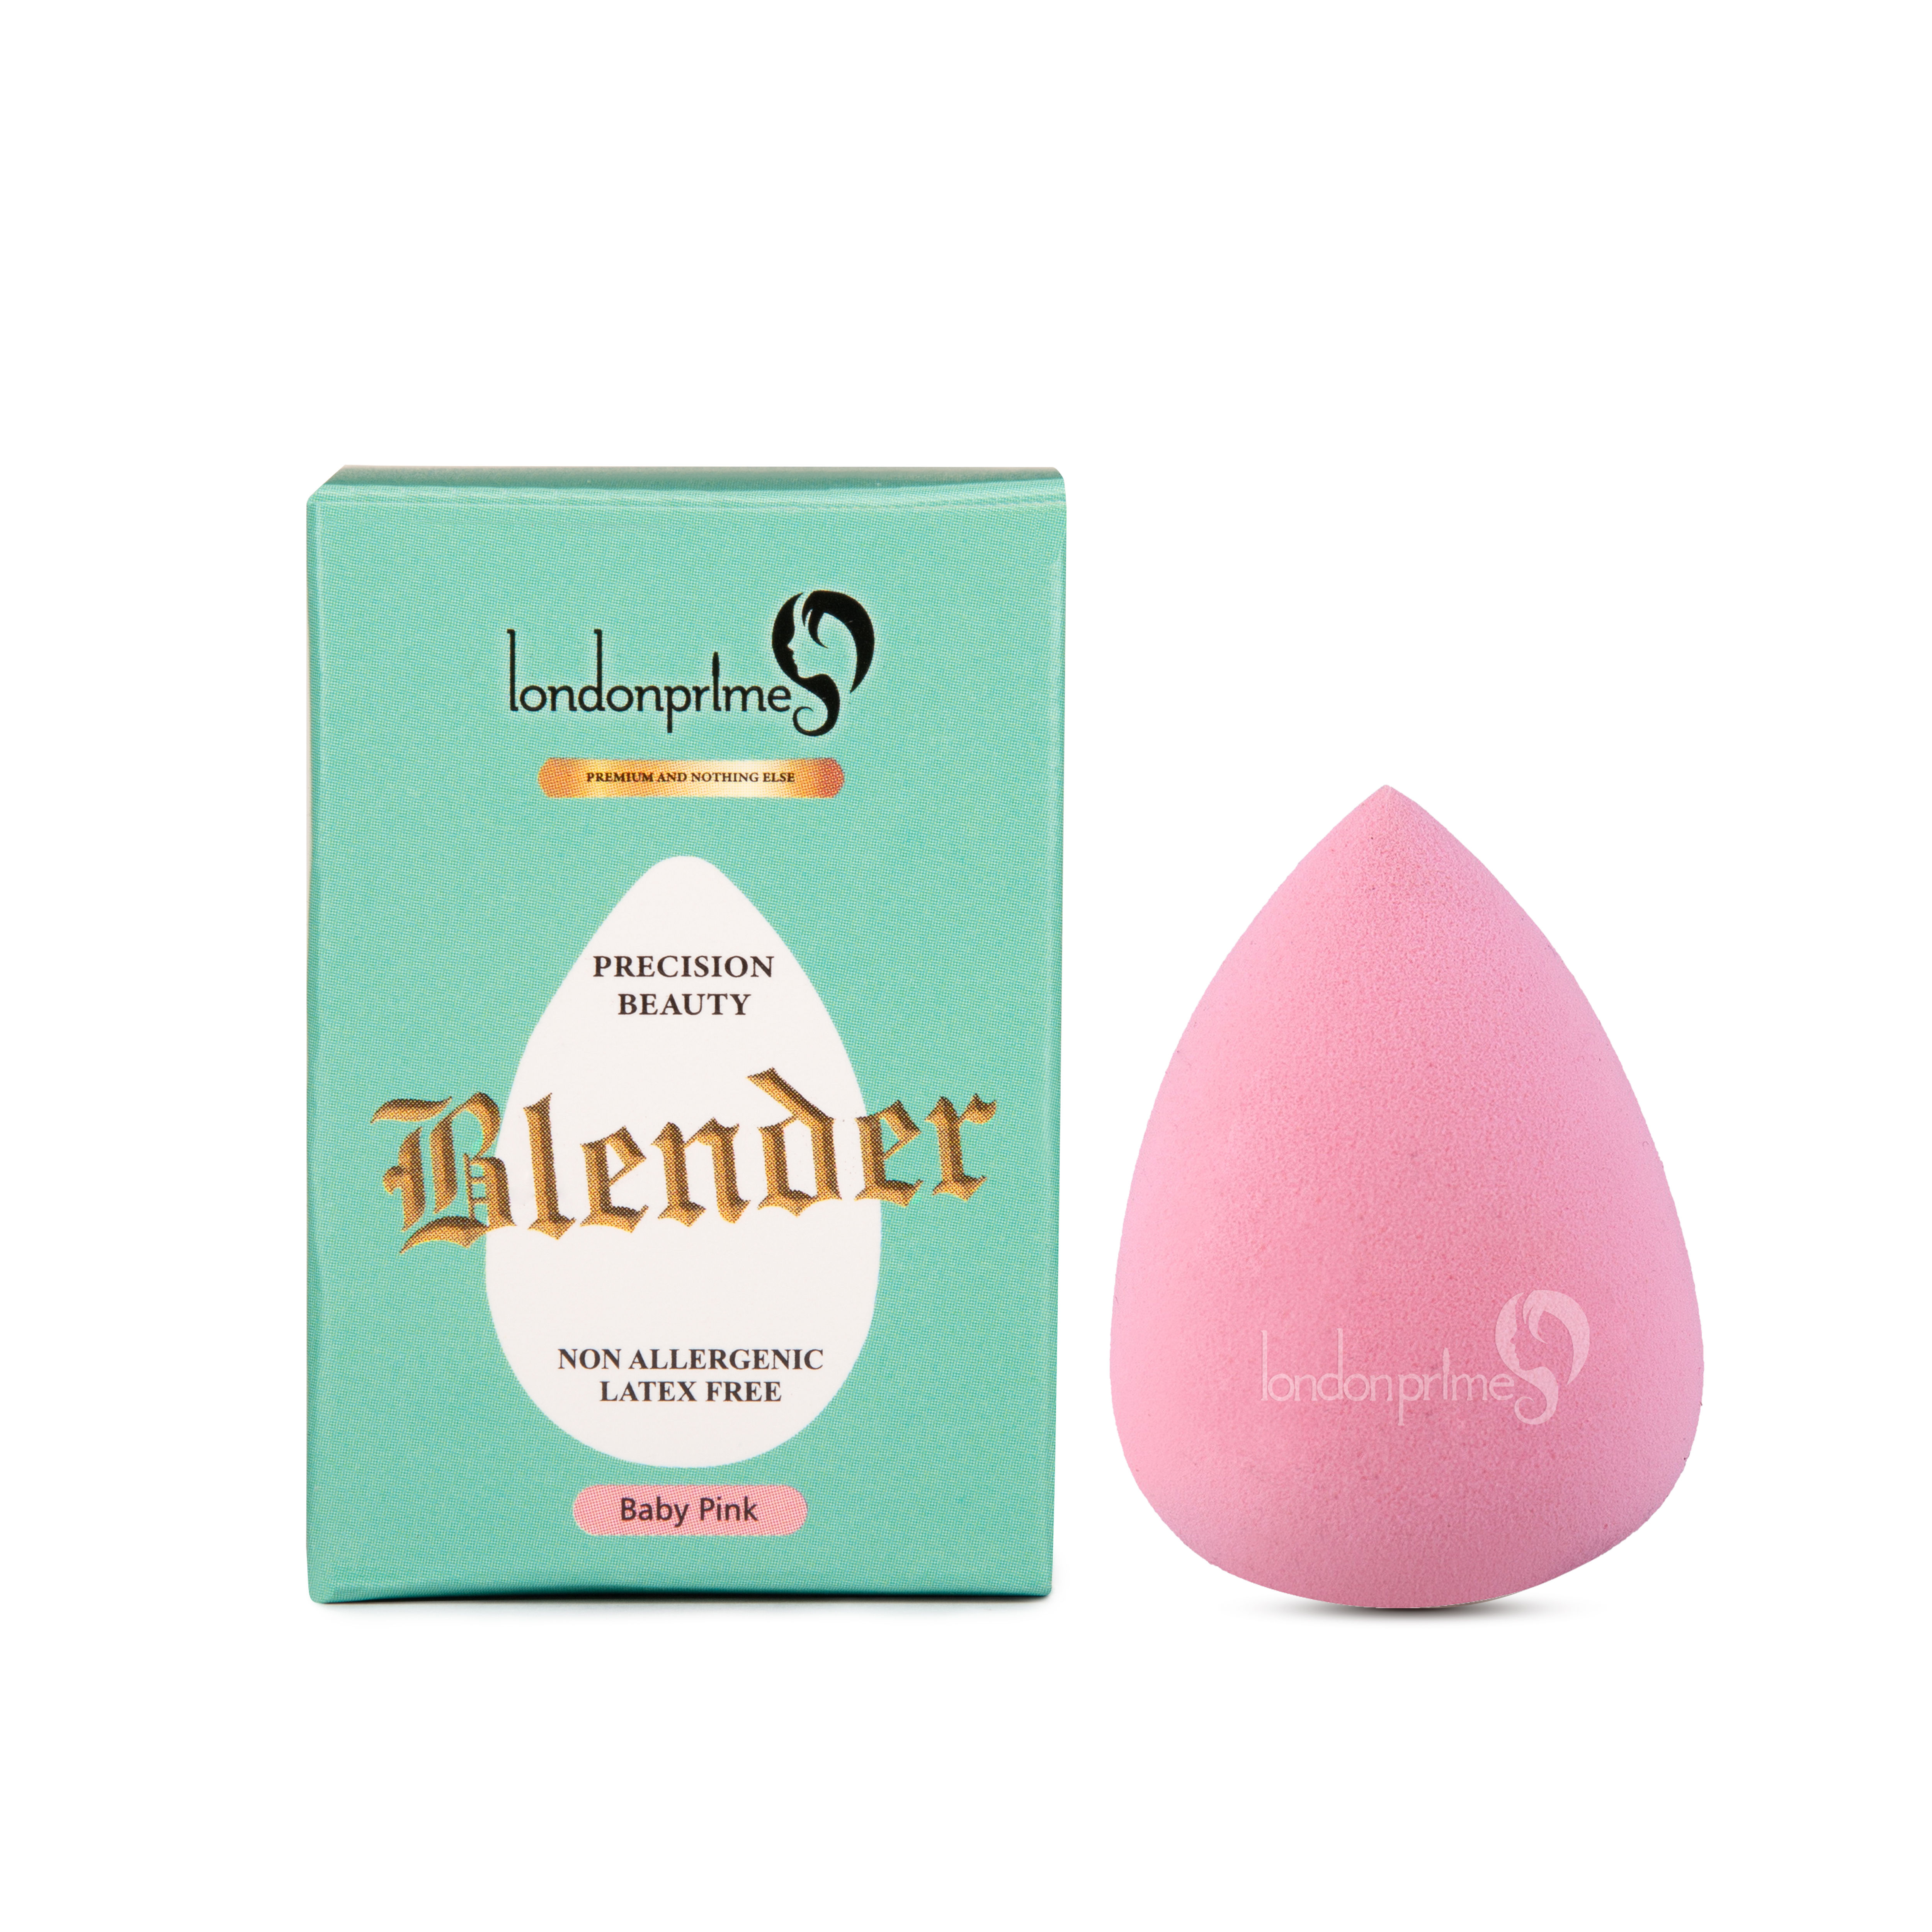 London Prime Precision Beauty Blender- Baby Pink ( Formerly London Pride Cosmetics )